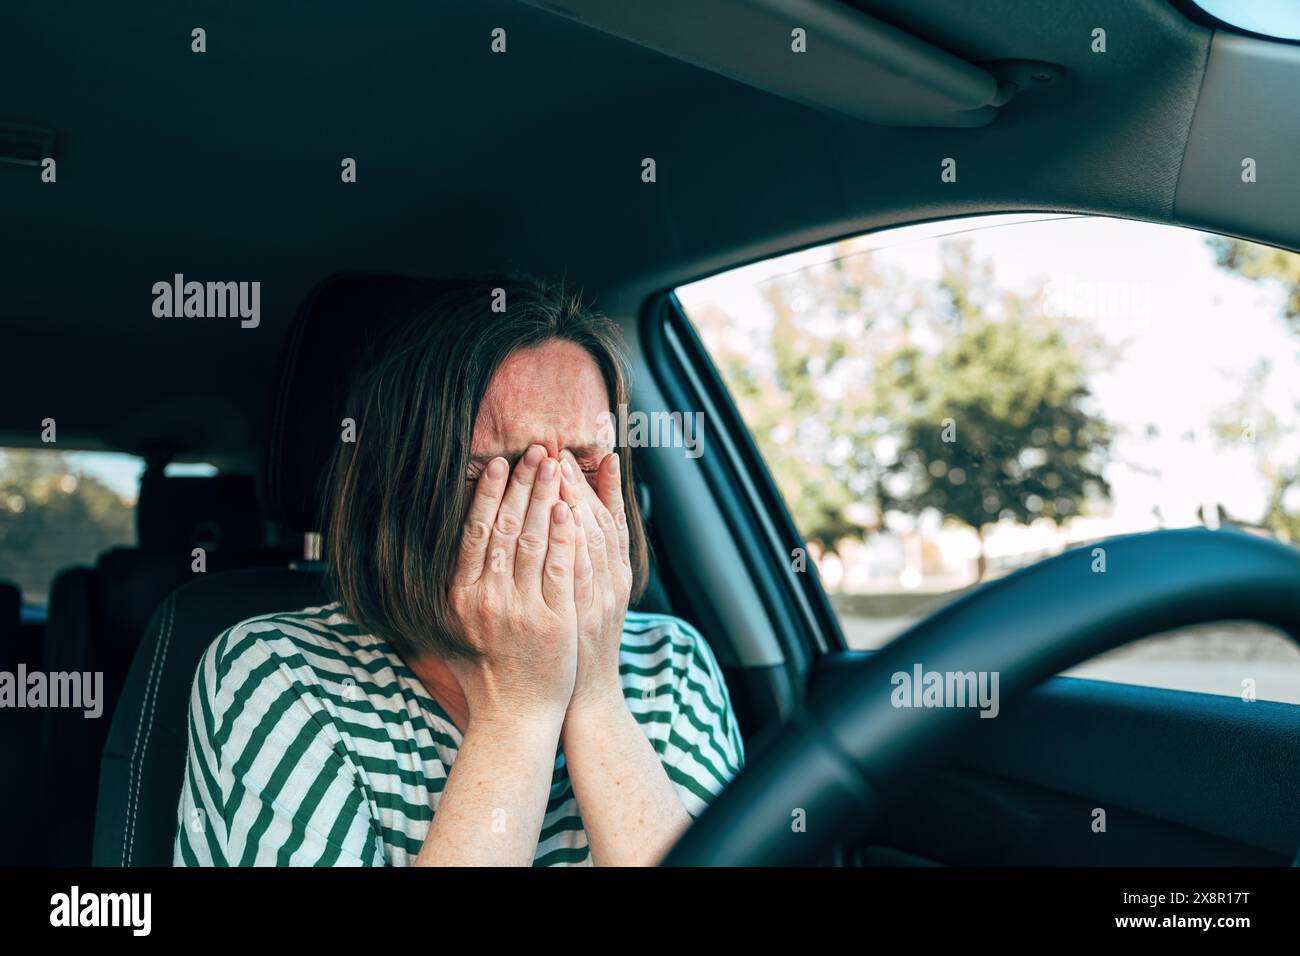 Sad disappointed female driver crying in car, selective focus Stock Photo